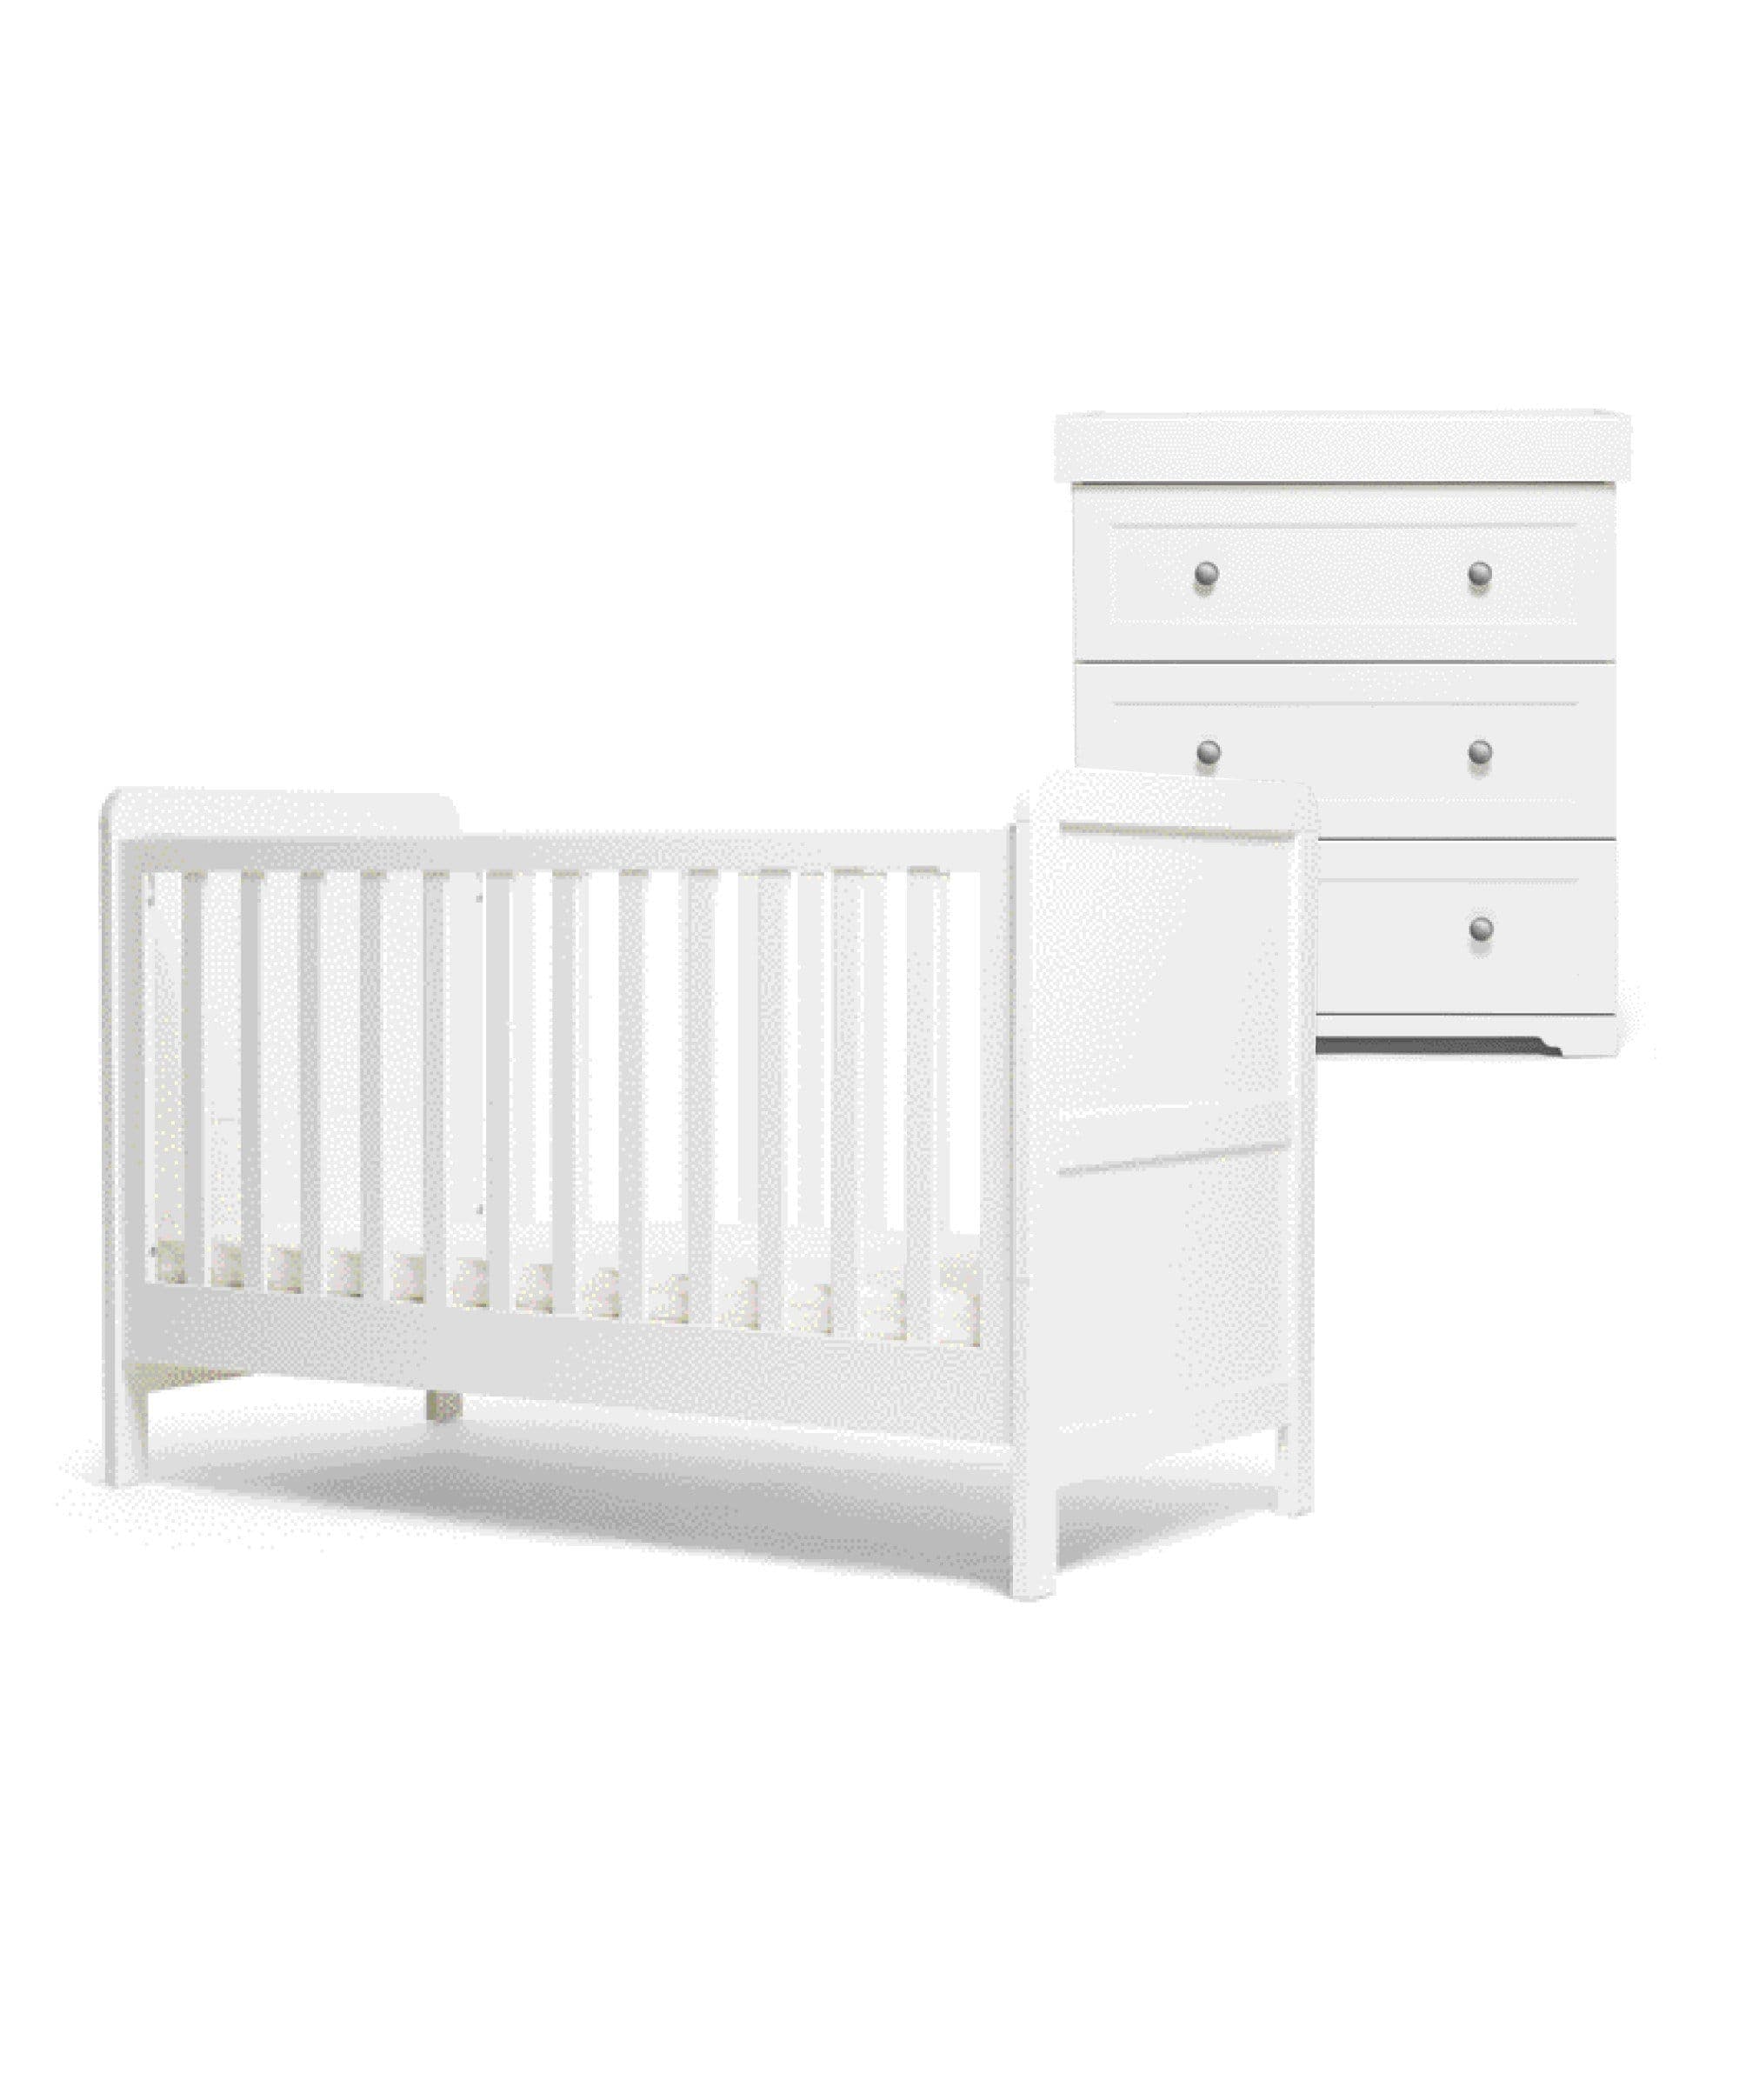 Ripley 2 Piece Cotbed Set with Dresser Changer - White